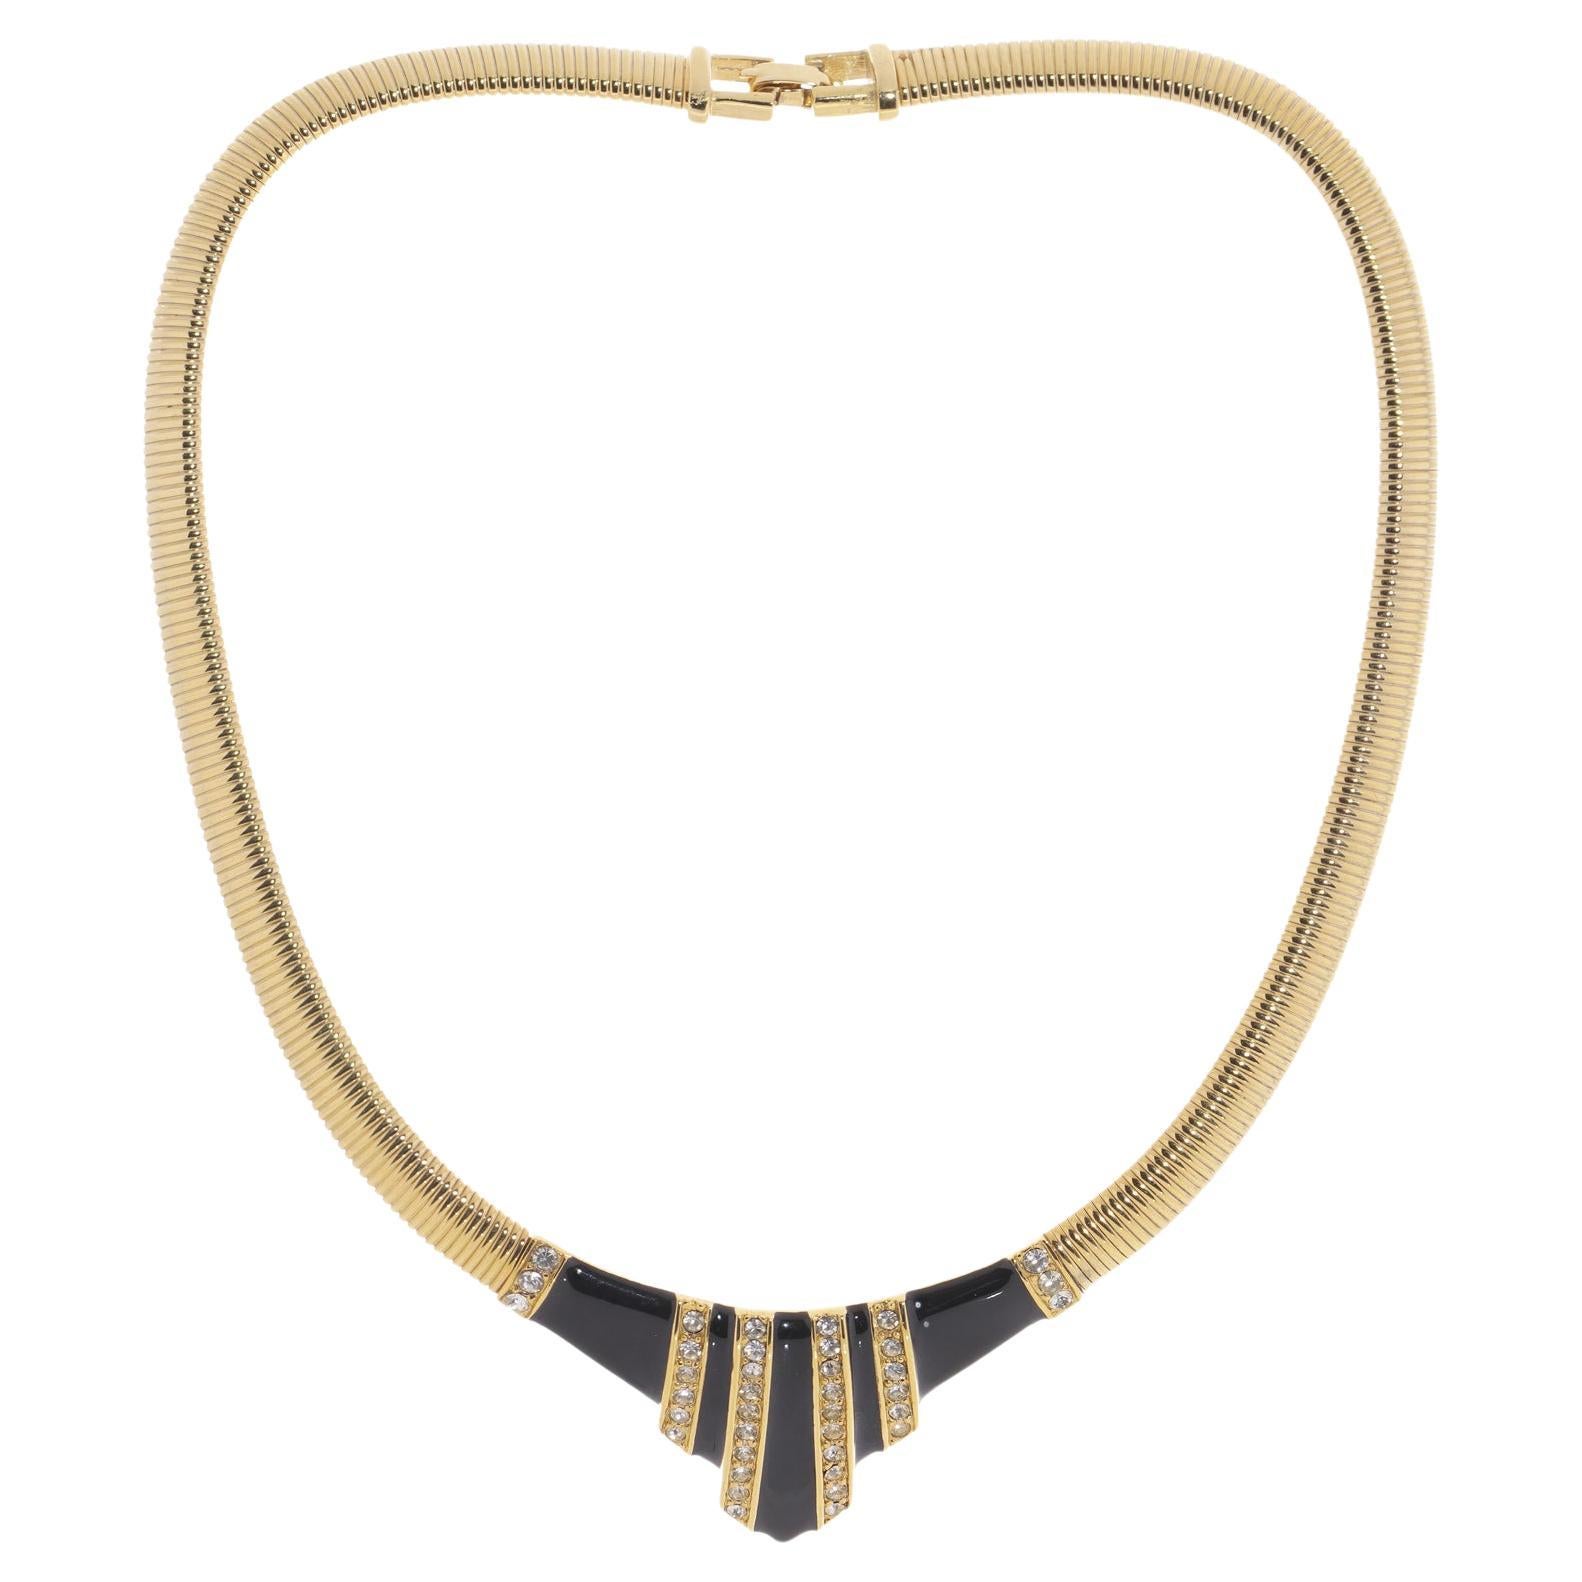 Vintage Givenchy Geometric Design Gold Tone and Black Enamel Collar Necklace